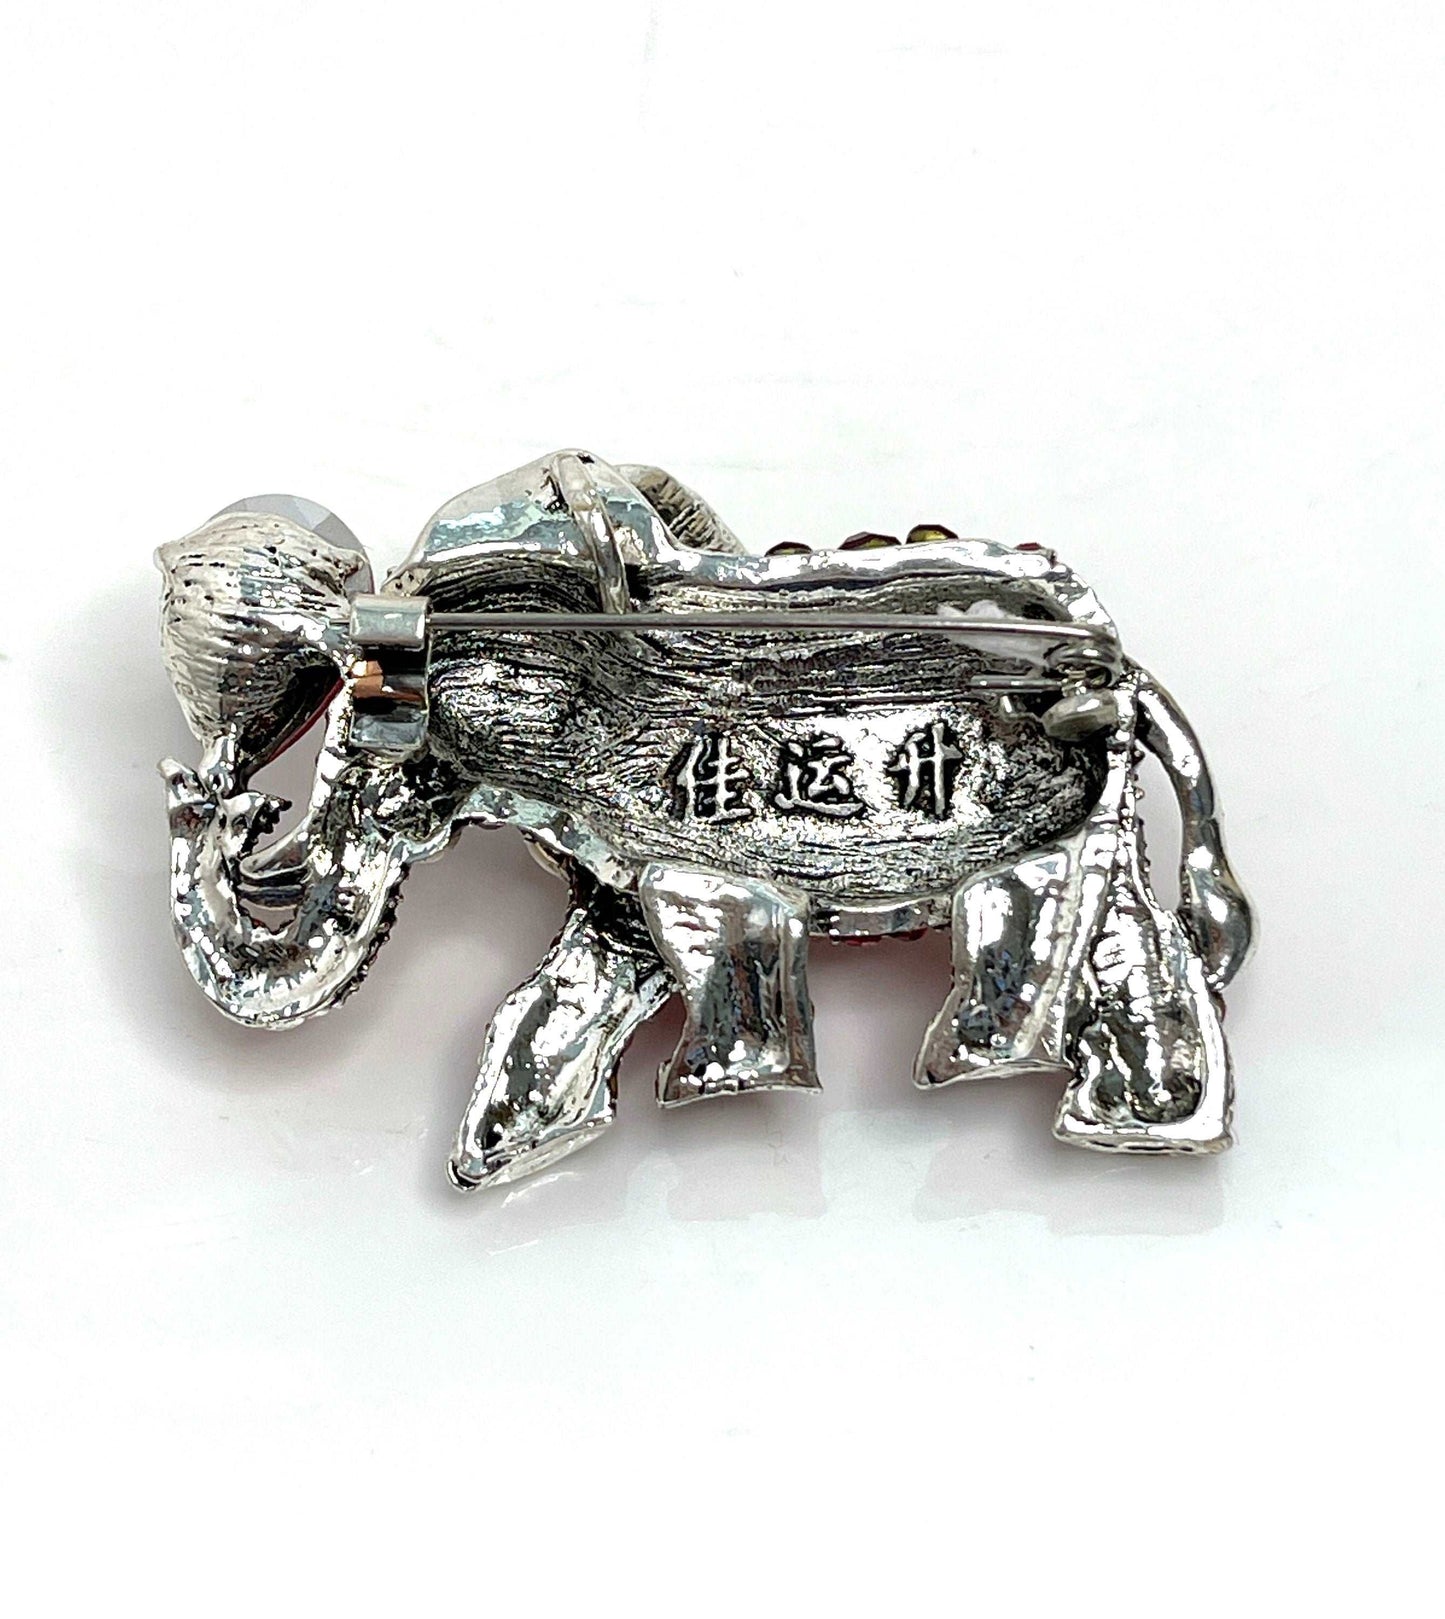 Large Red Indian Elephant Brooch, Sparkly Elephant Pin, Crystal Animal Pin, Multi Crystal Diamonte Pin, Brooches For Women